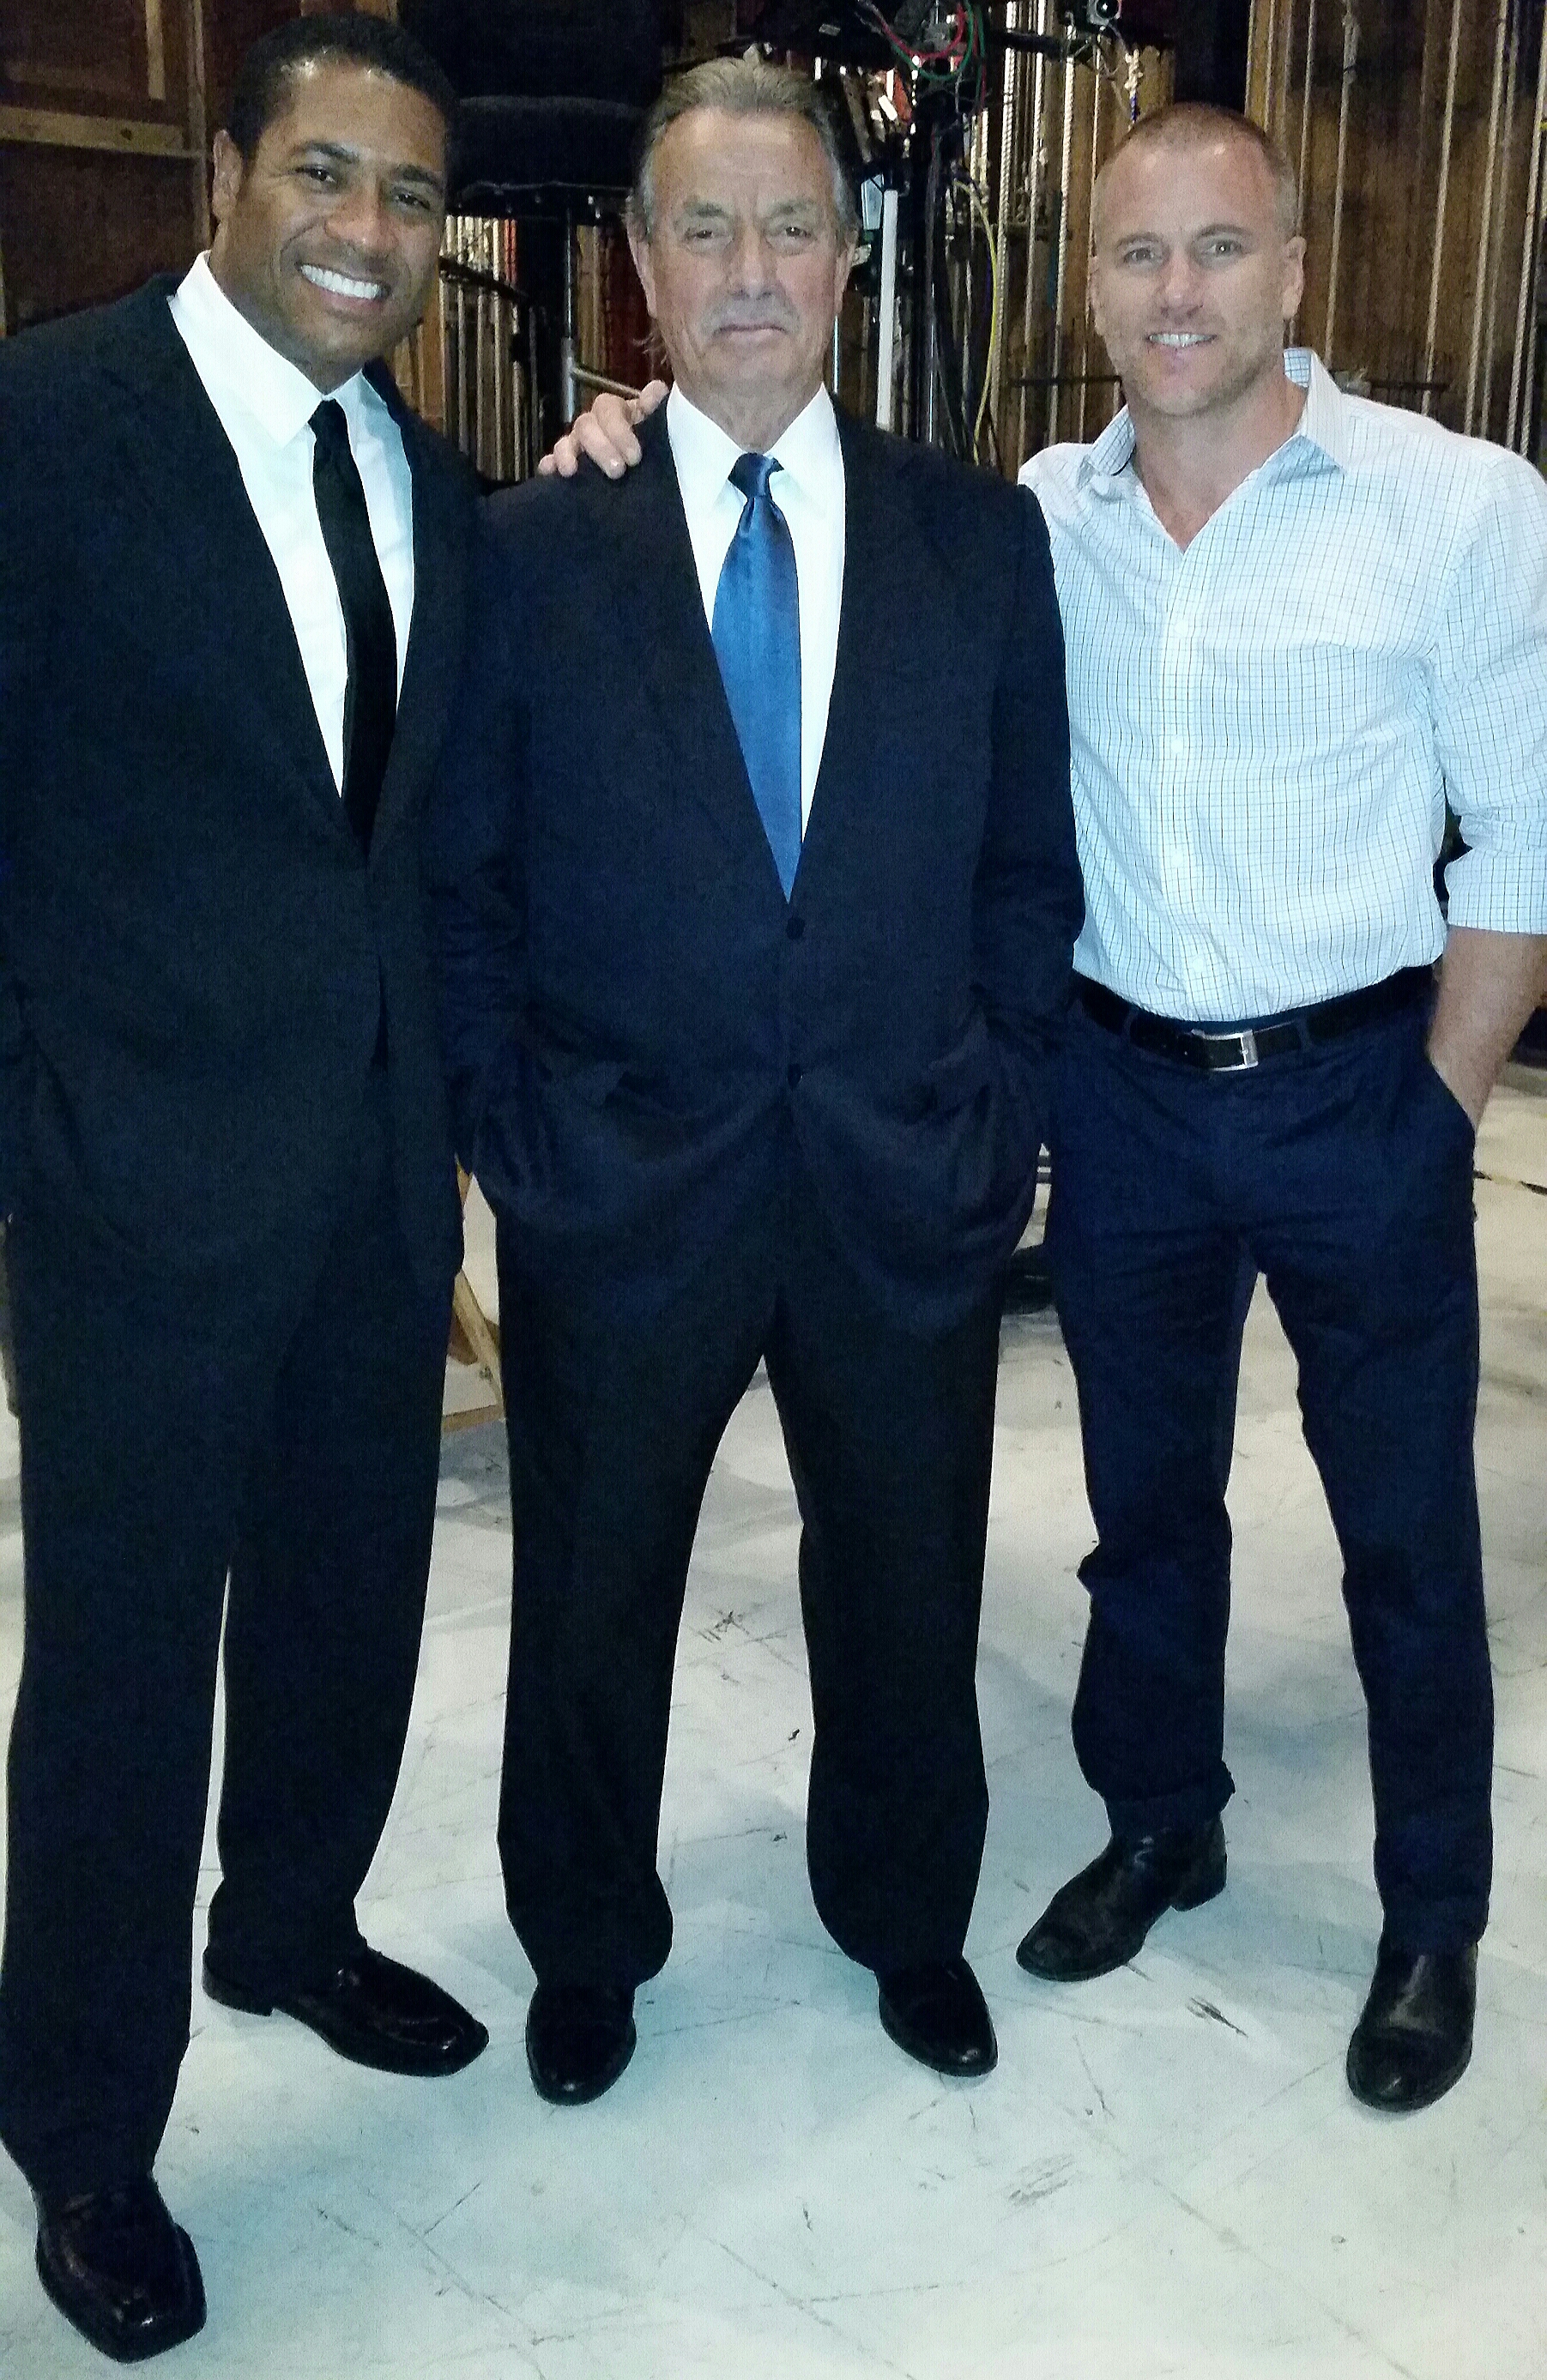 Eric Braeden (Victor Newman), Sean Carrigan and Mandell Frazier on set of CBS's 